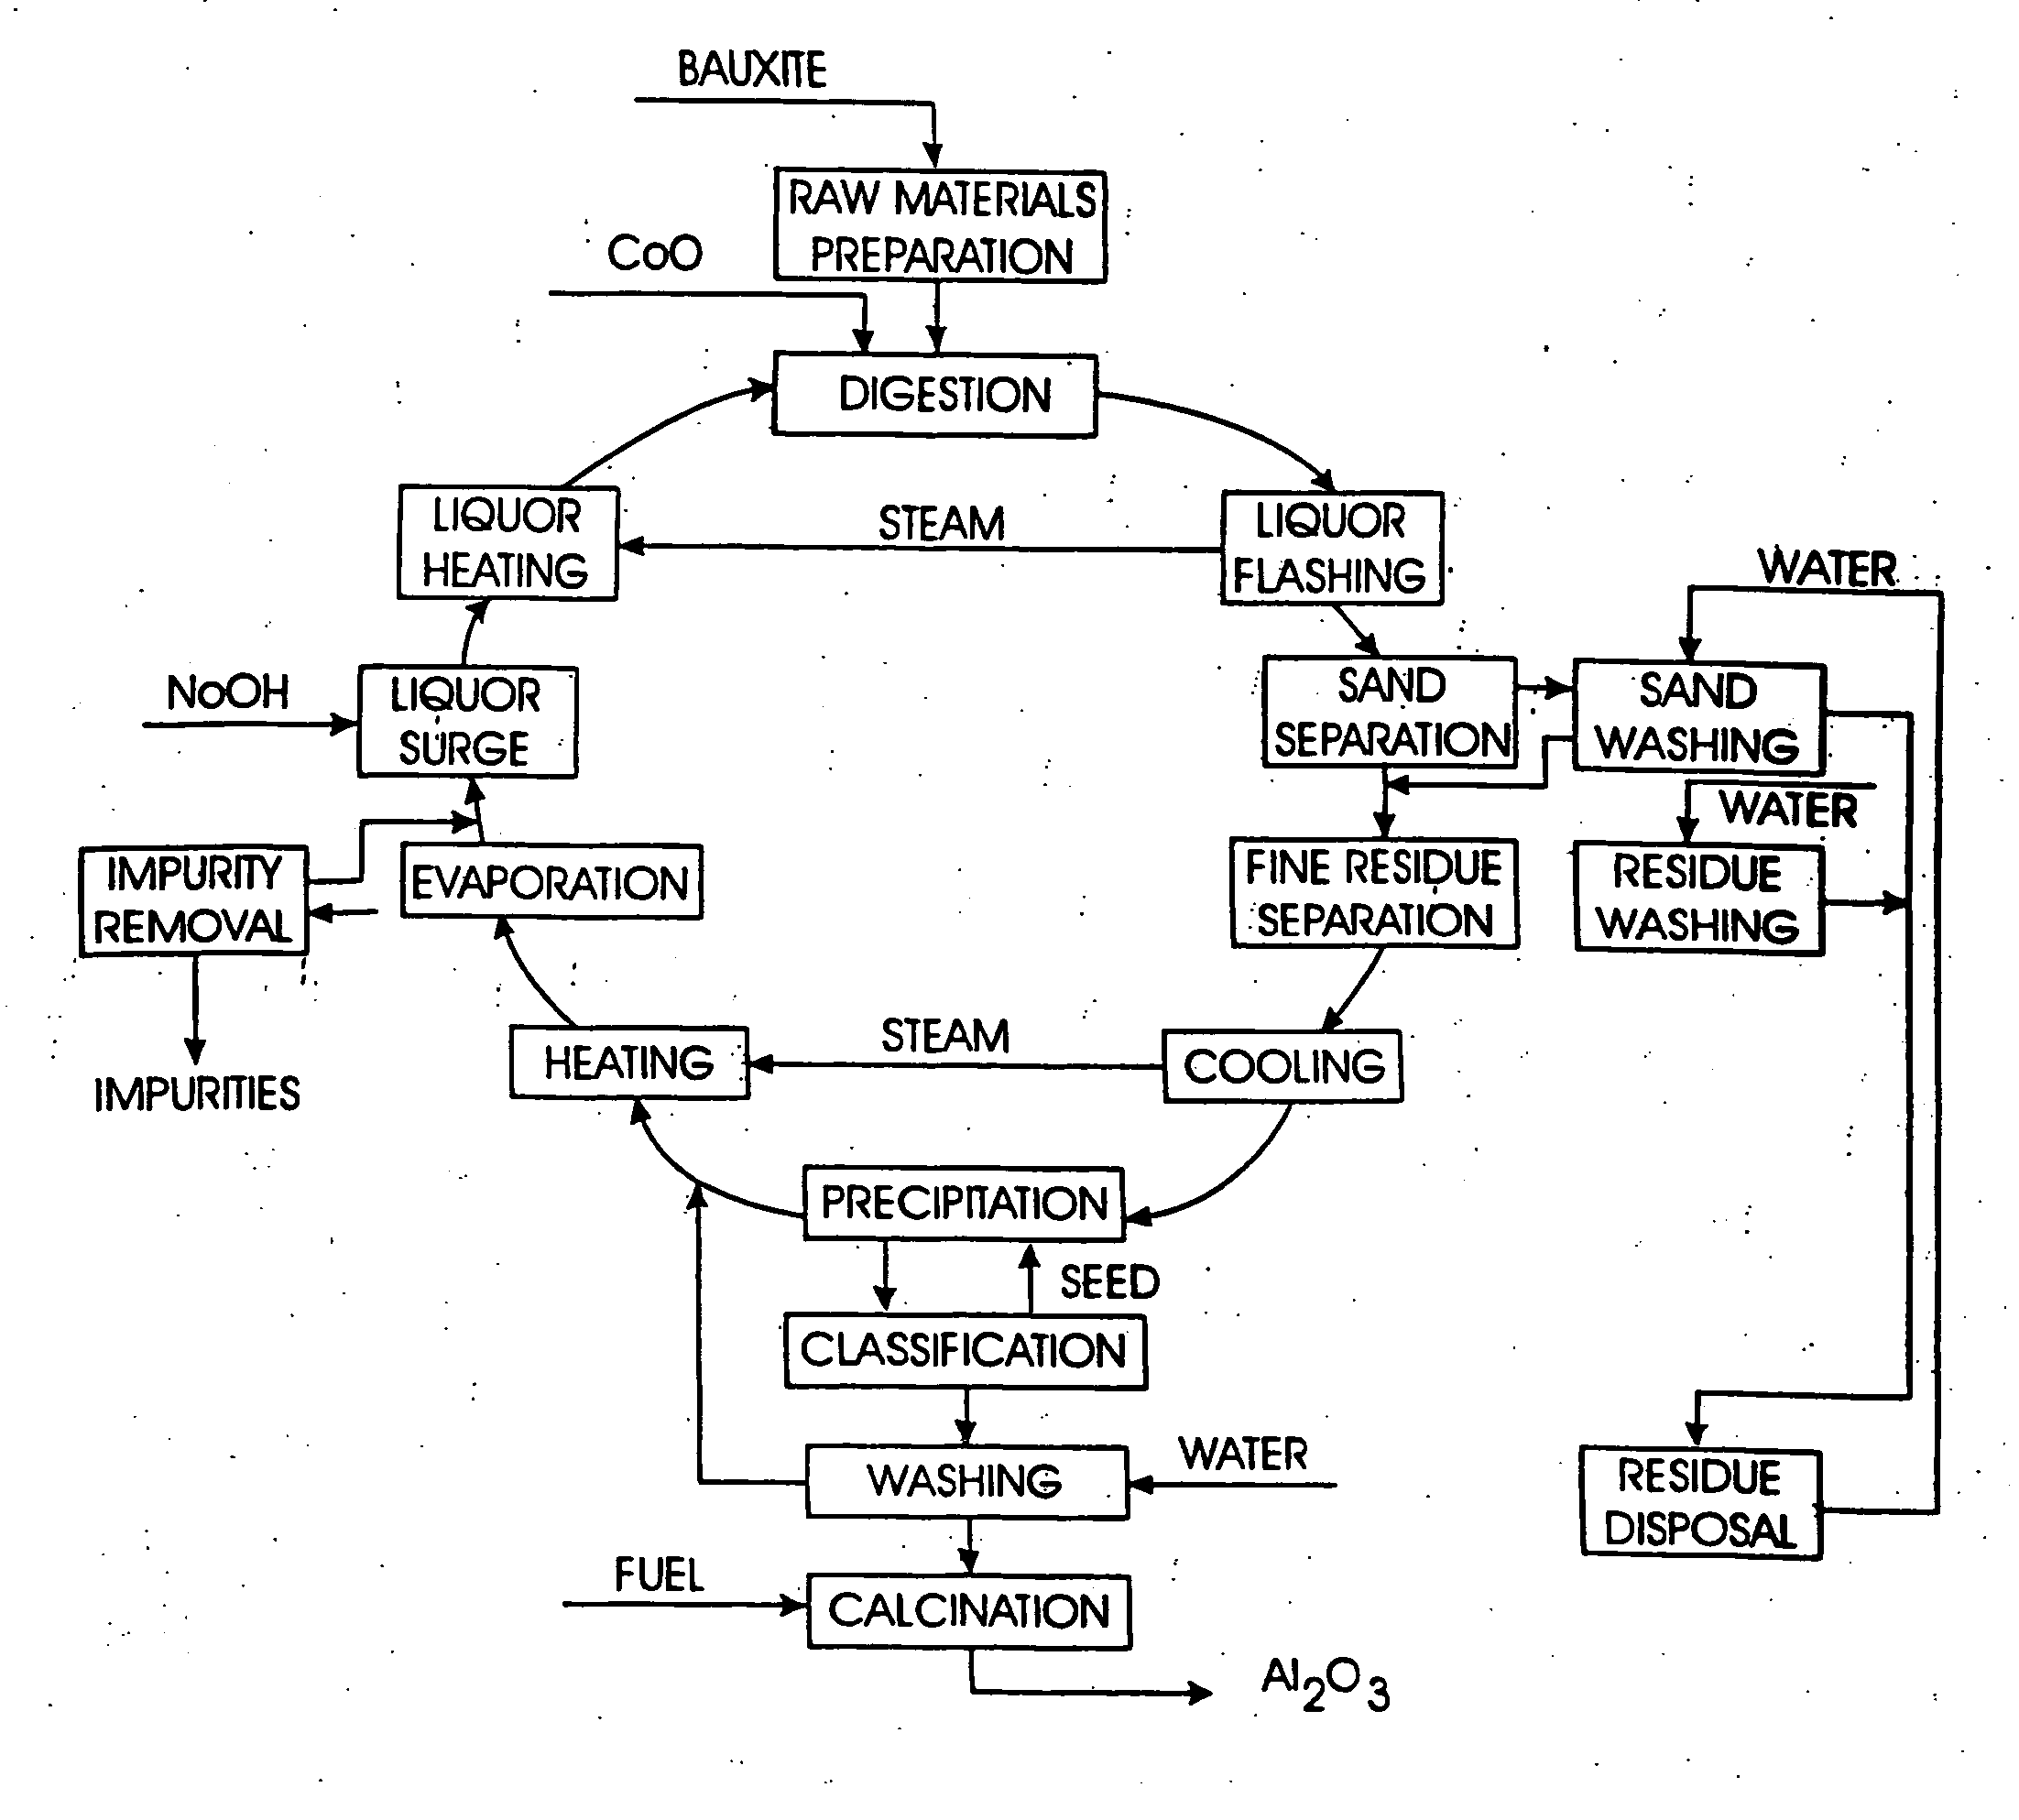 Process for reducing contaminants in condensate resulting from the conversion of bauxite to alumina